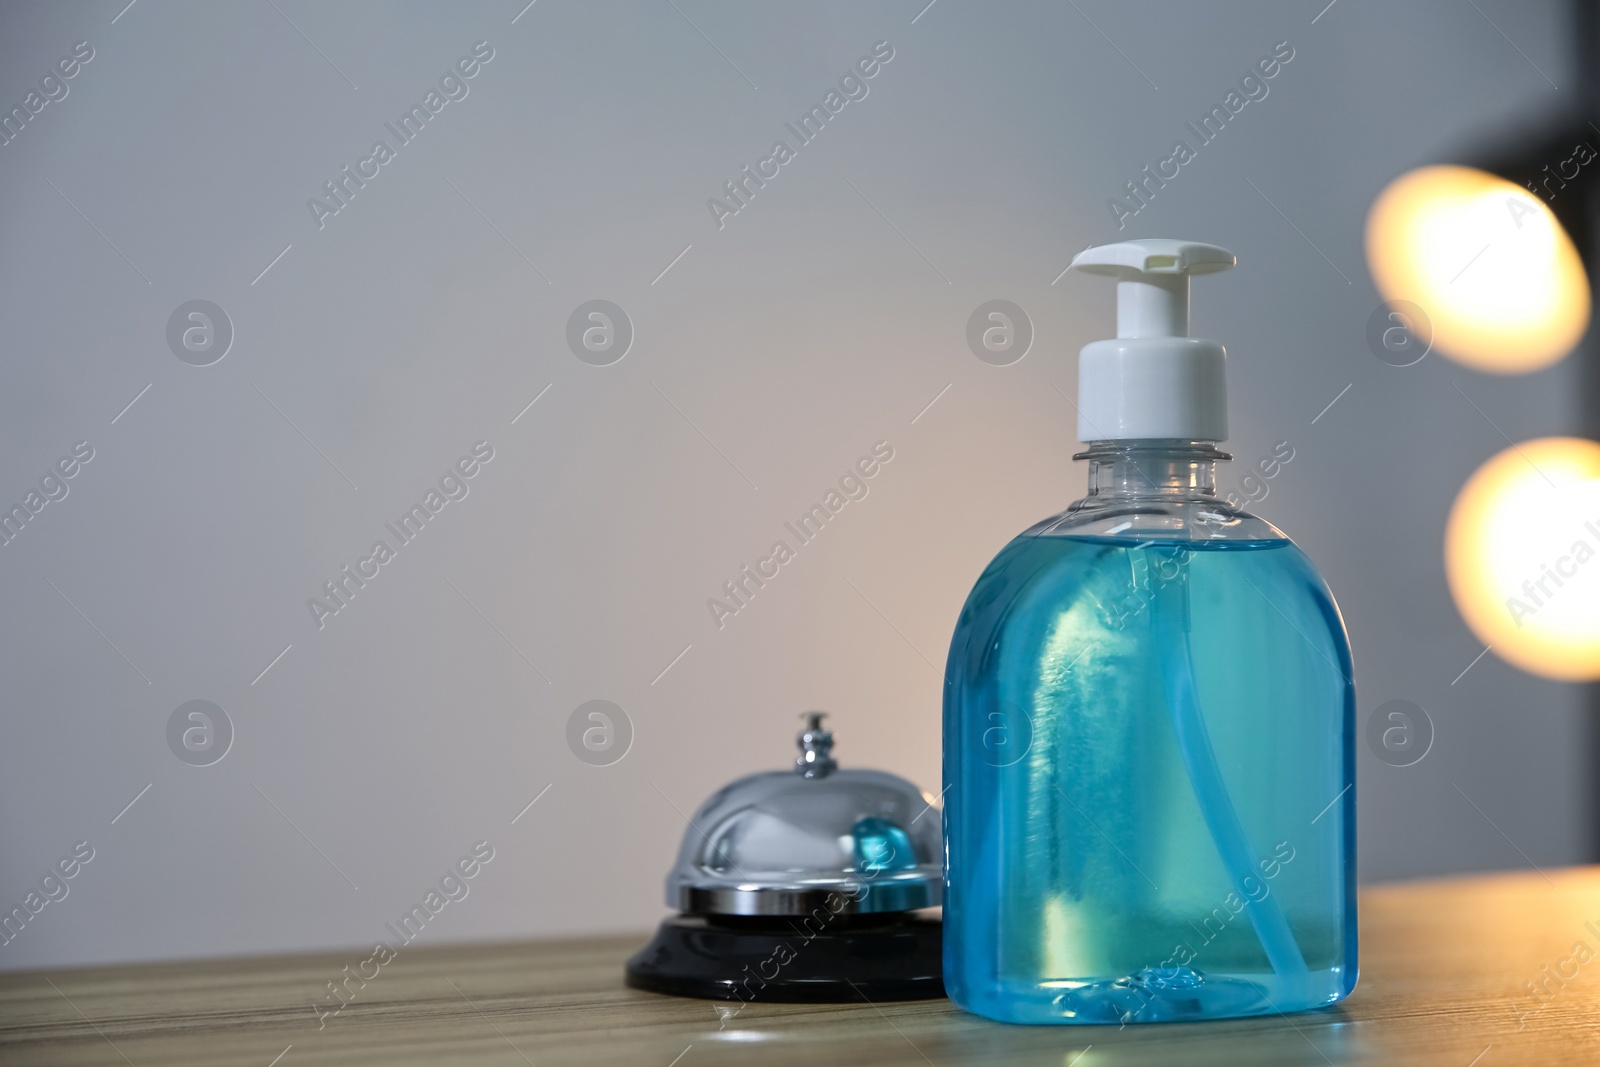 Photo of Dispenser bottleantiseptic gel and service bell on reception desk in hotel. Space for text